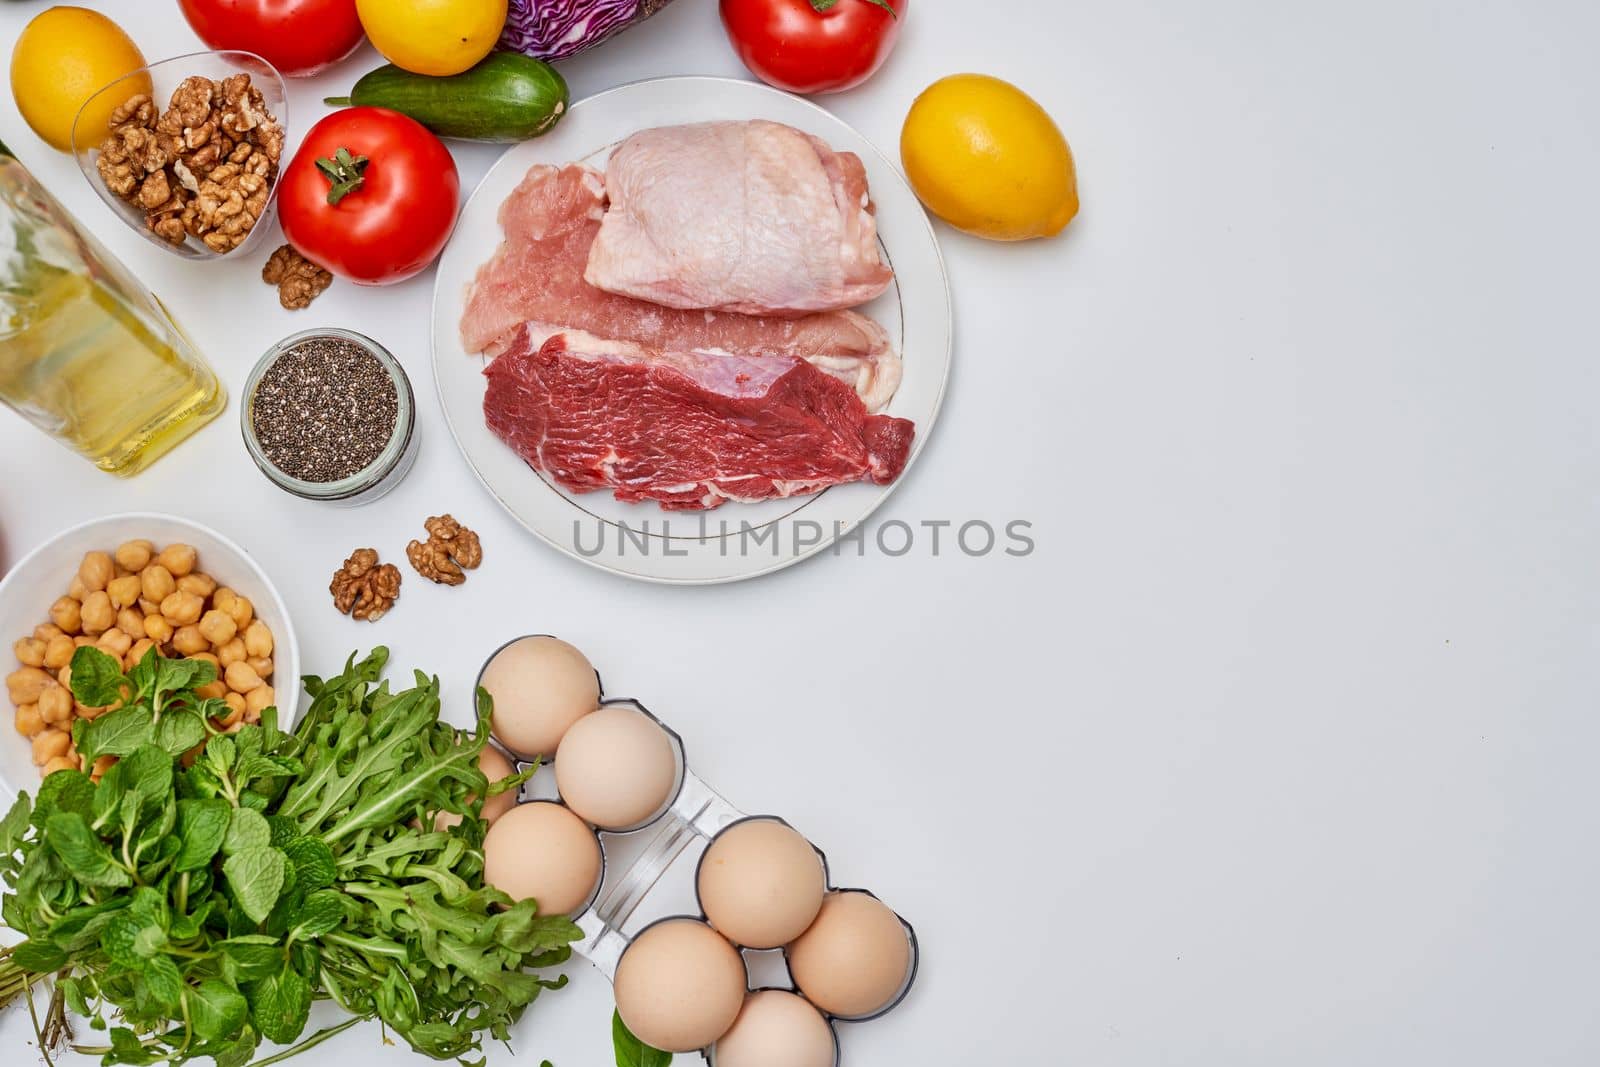 food that includes meat, eggs, vegetables, nuts and other items on a white background with space for text